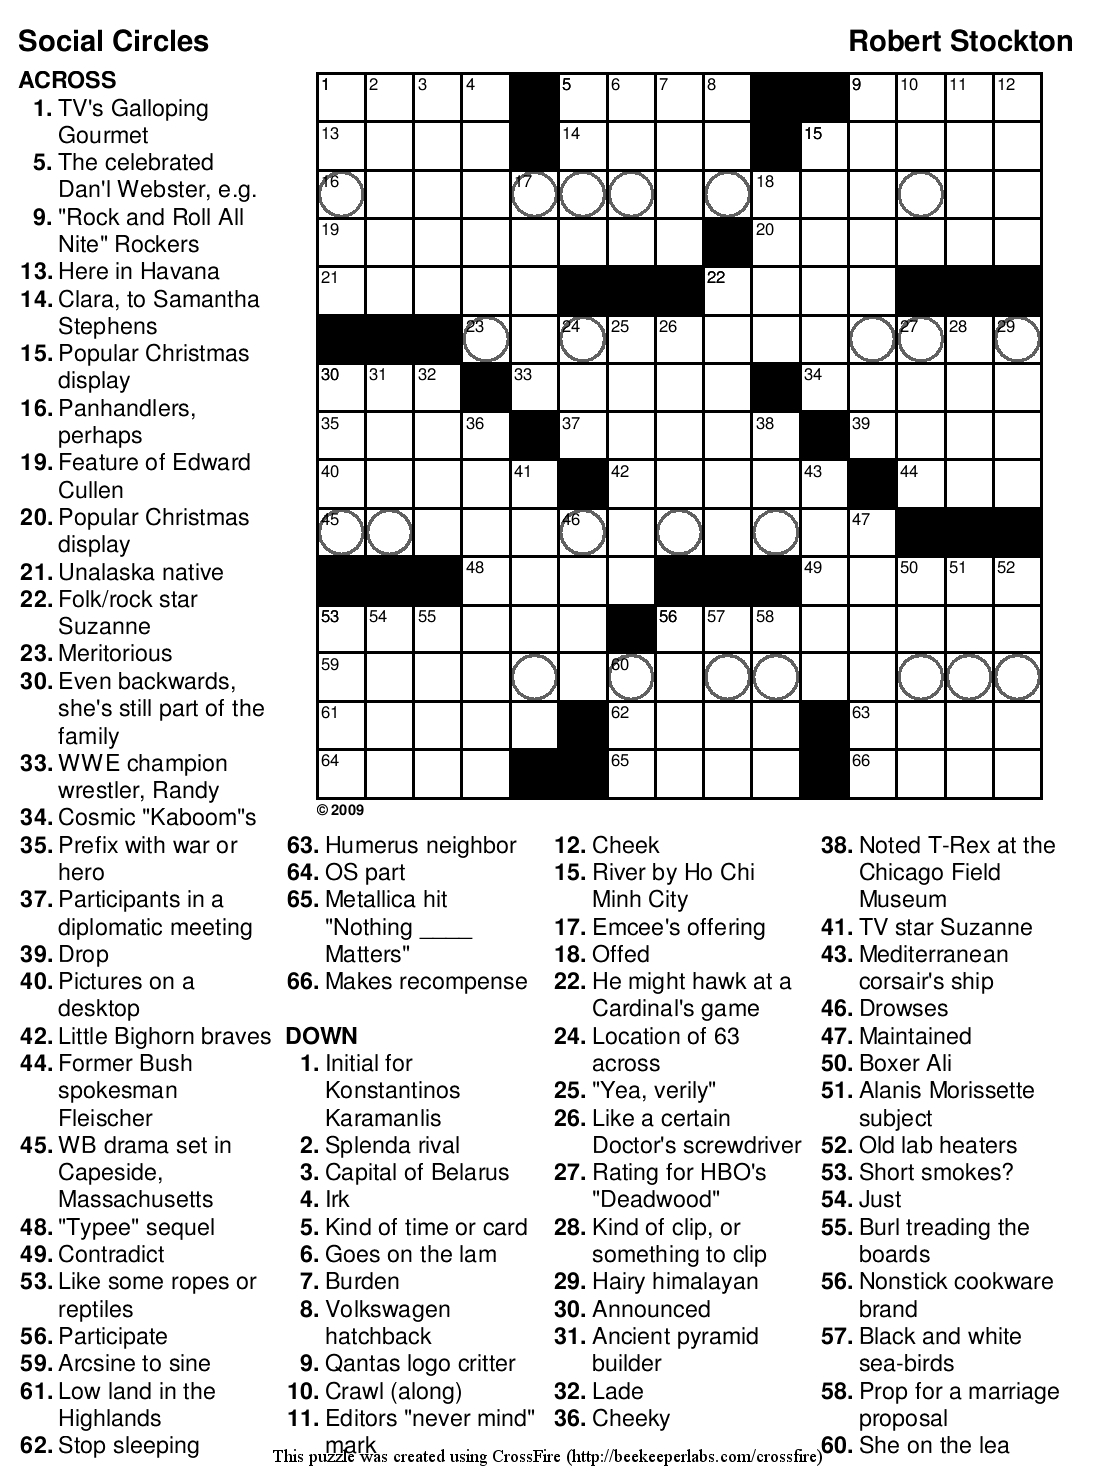 Crossword Puzzles Printable - Yahoo Image Search Results | Crossword - Printable Crossword Puzzles 2019